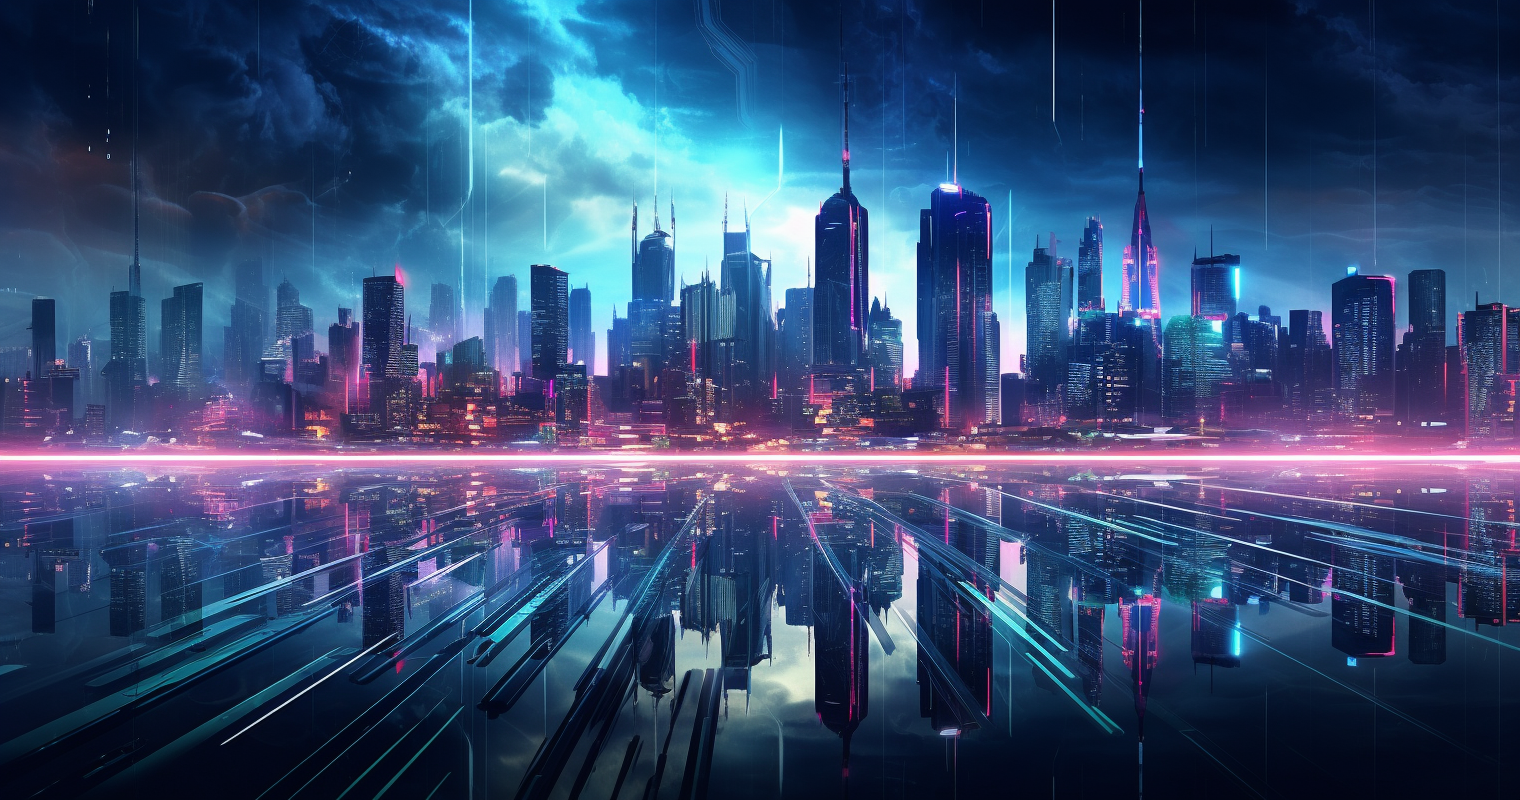 Futuristic cityscape powered by a network of glowing copper cables.